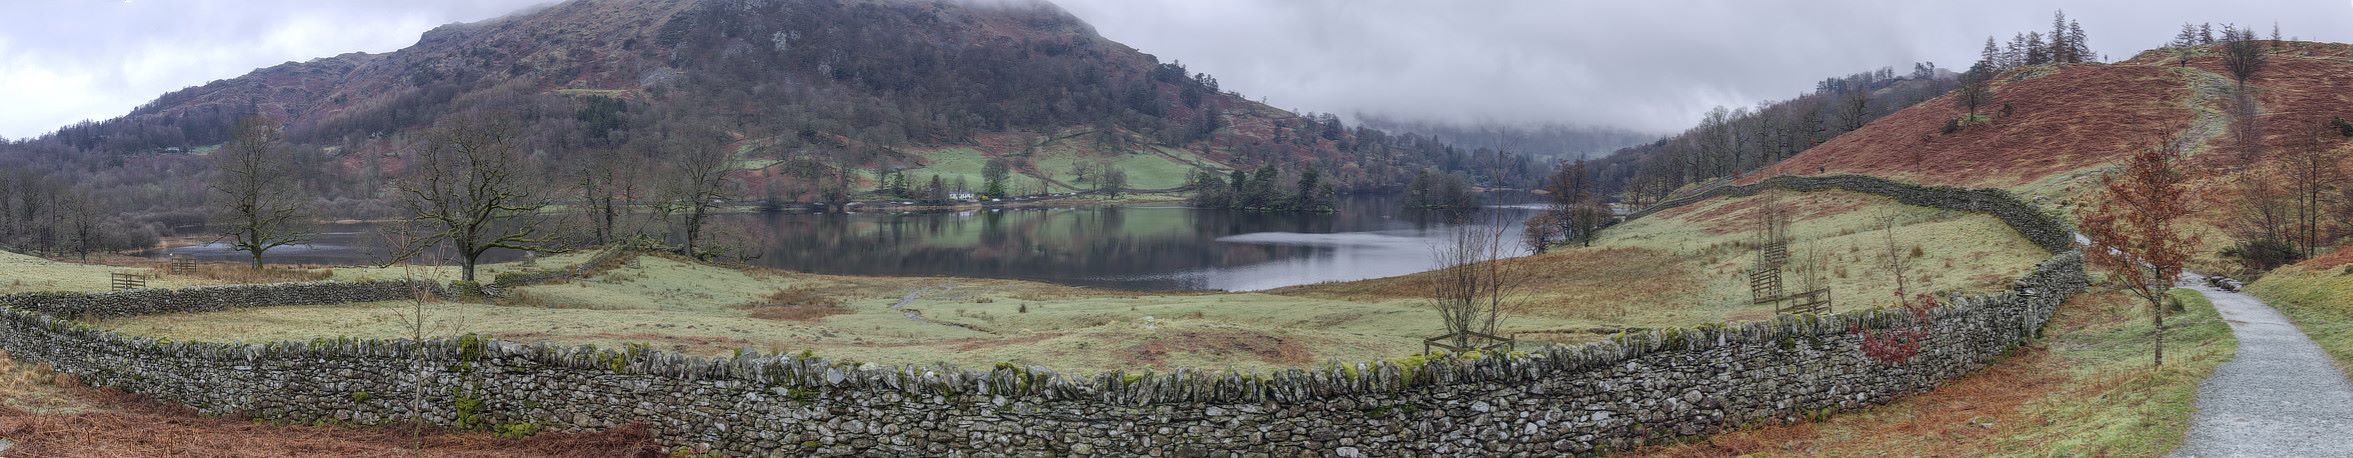 Rydal Water view from the South side between Grasmere & Rydal.